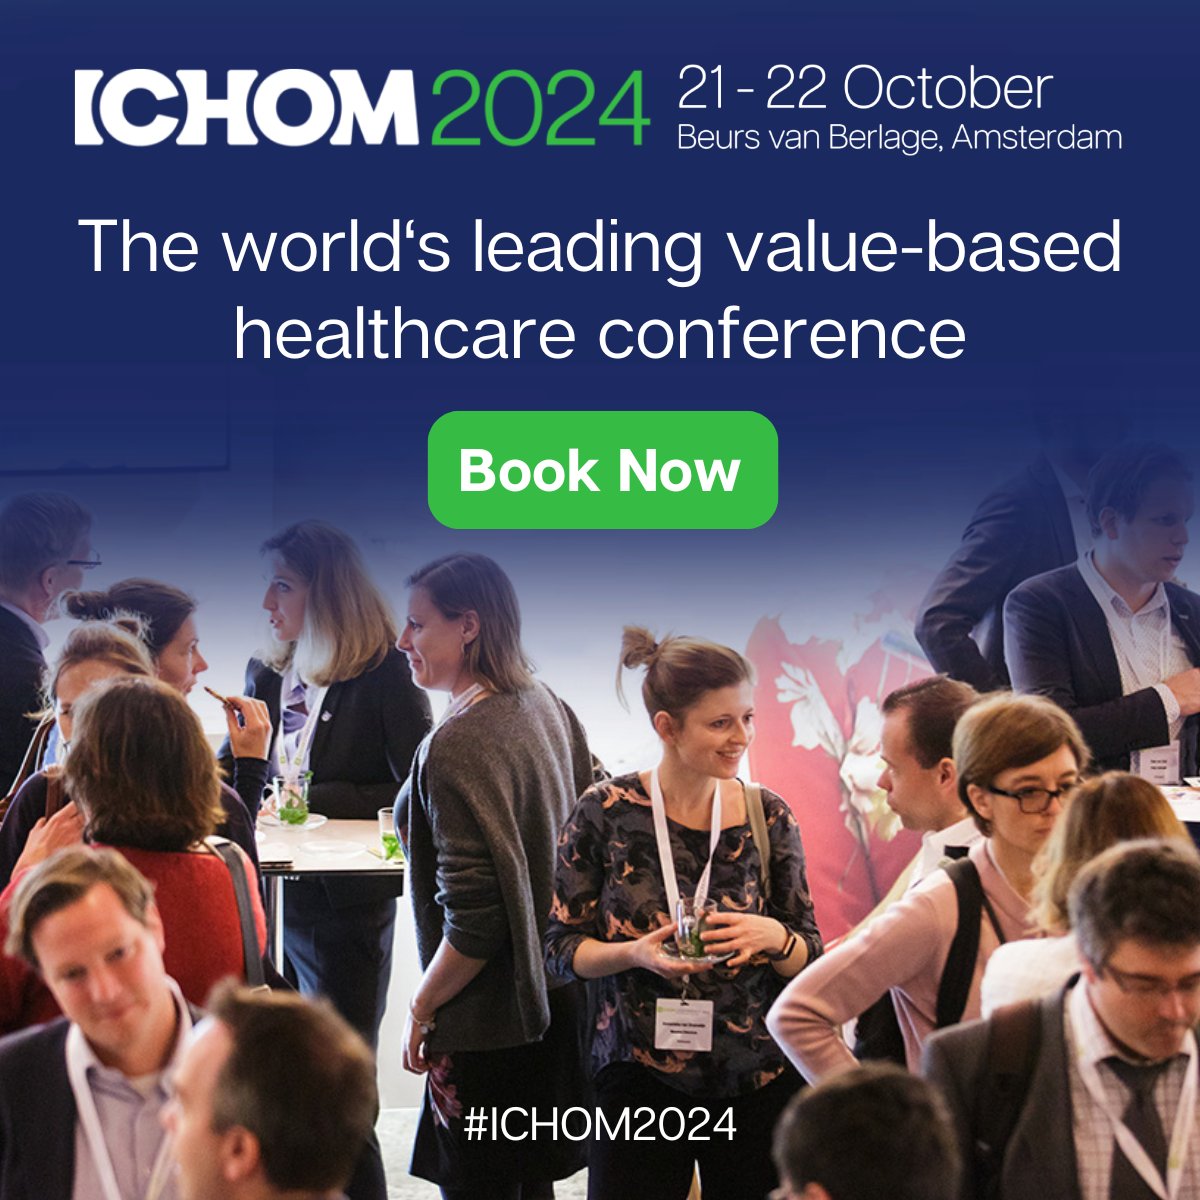 Debate pressing healthcare issues & help shape the future of VBHC at #ICHOM2024 🤝 Delegates are already joining us from renowned organizations including @JNJNews, @BupaUK, @StatistaCharts, and many more. Save over 20% when you book our Early Bird offer: bit.ly/3y333B5